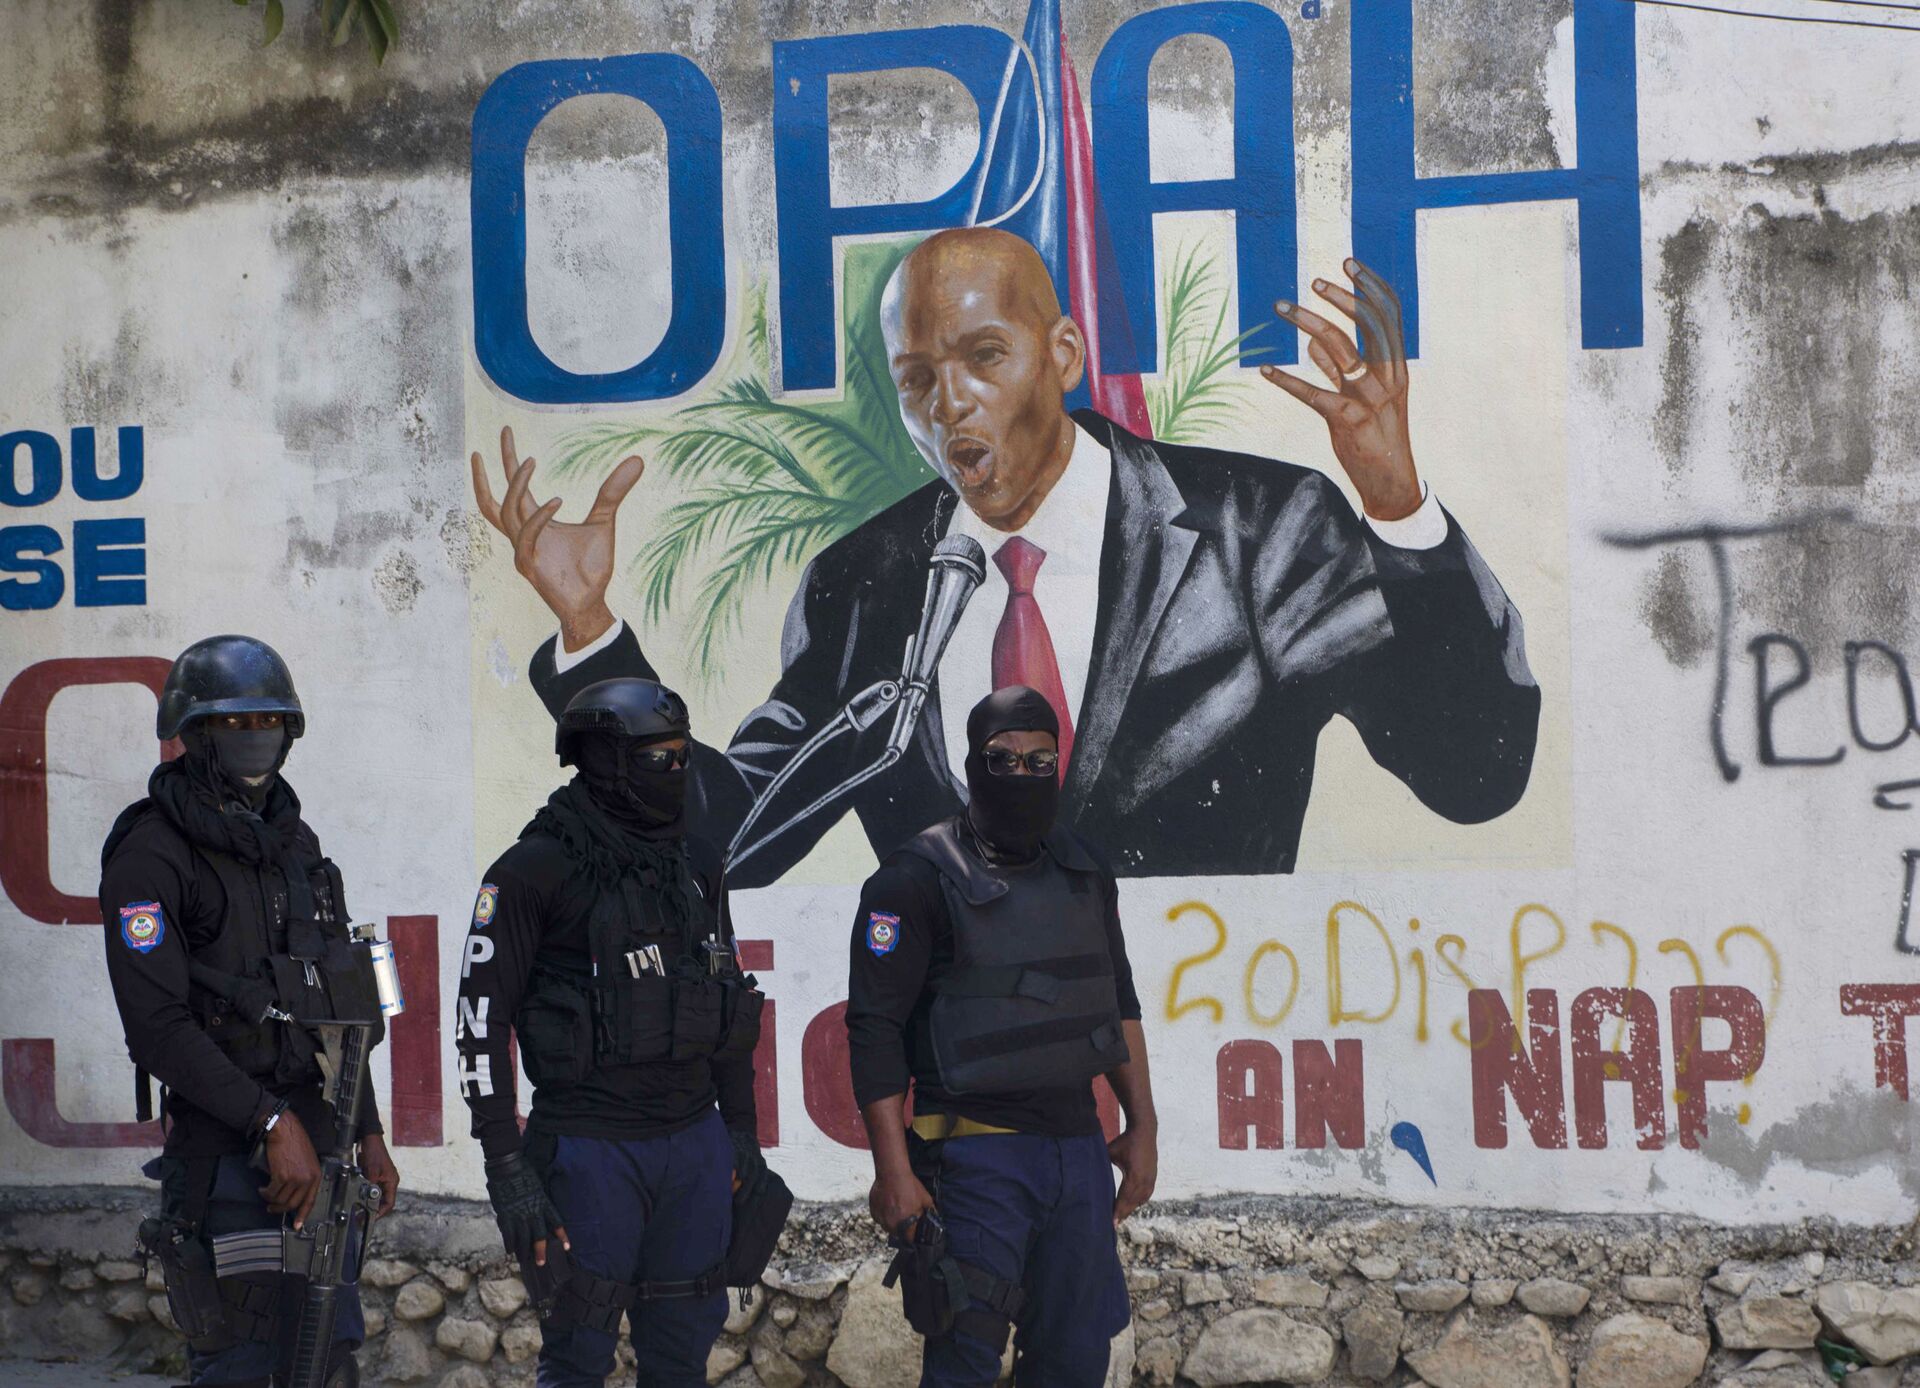 Police stand near a mural featuring Haitian President Jovenel Moise, near the leader’s residence where he was killed by gunmen in the early morning hours in Port-au-Prince, Haiti, Wednesday, July 7, 2021. - Sputnik International, 1920, 07.09.2021